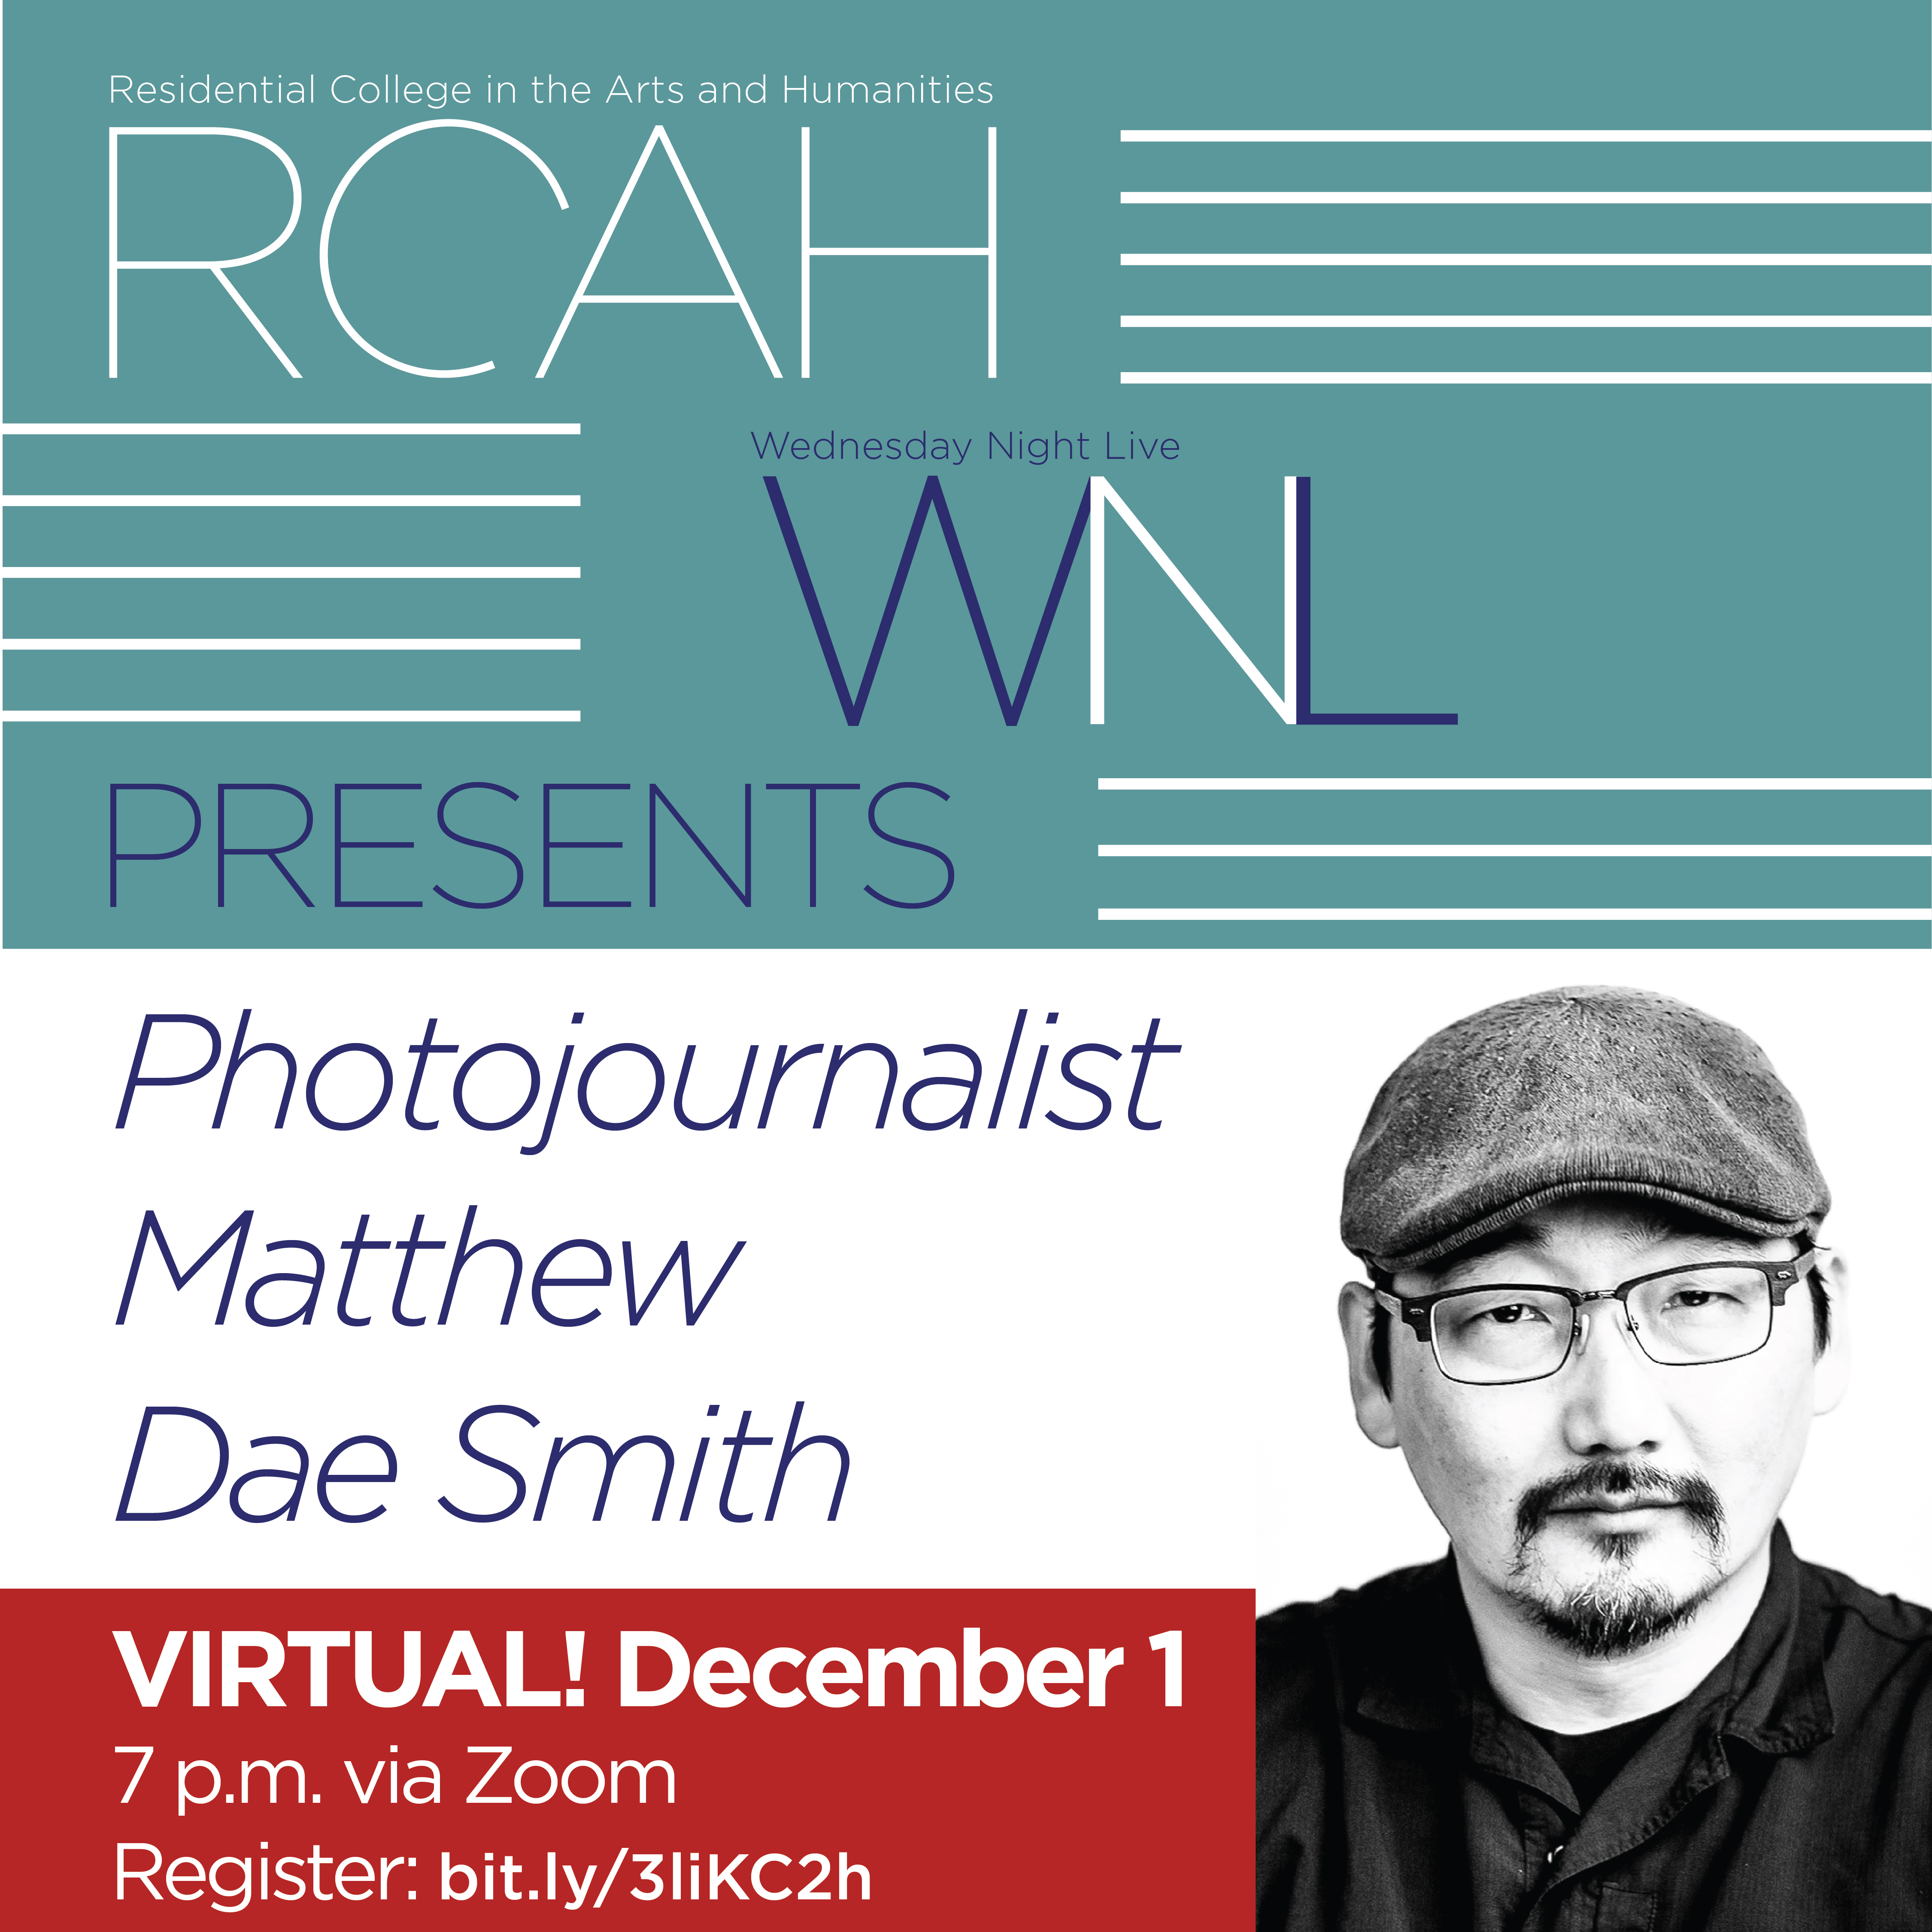 Image has a teal header with thin text and white lines that reads "RCH WNL PRESENTS" followed by text next to an image reading "Photojournalist Matthew Dae Smith." A black and white photo of an Asian man with glasses and wearing a newscap is the on right. Slightly beneath it is a red box and text reading "VIRTUAL! December 1, 7 p.m. via Zoom. Register: bit.ly/3liKC2h"